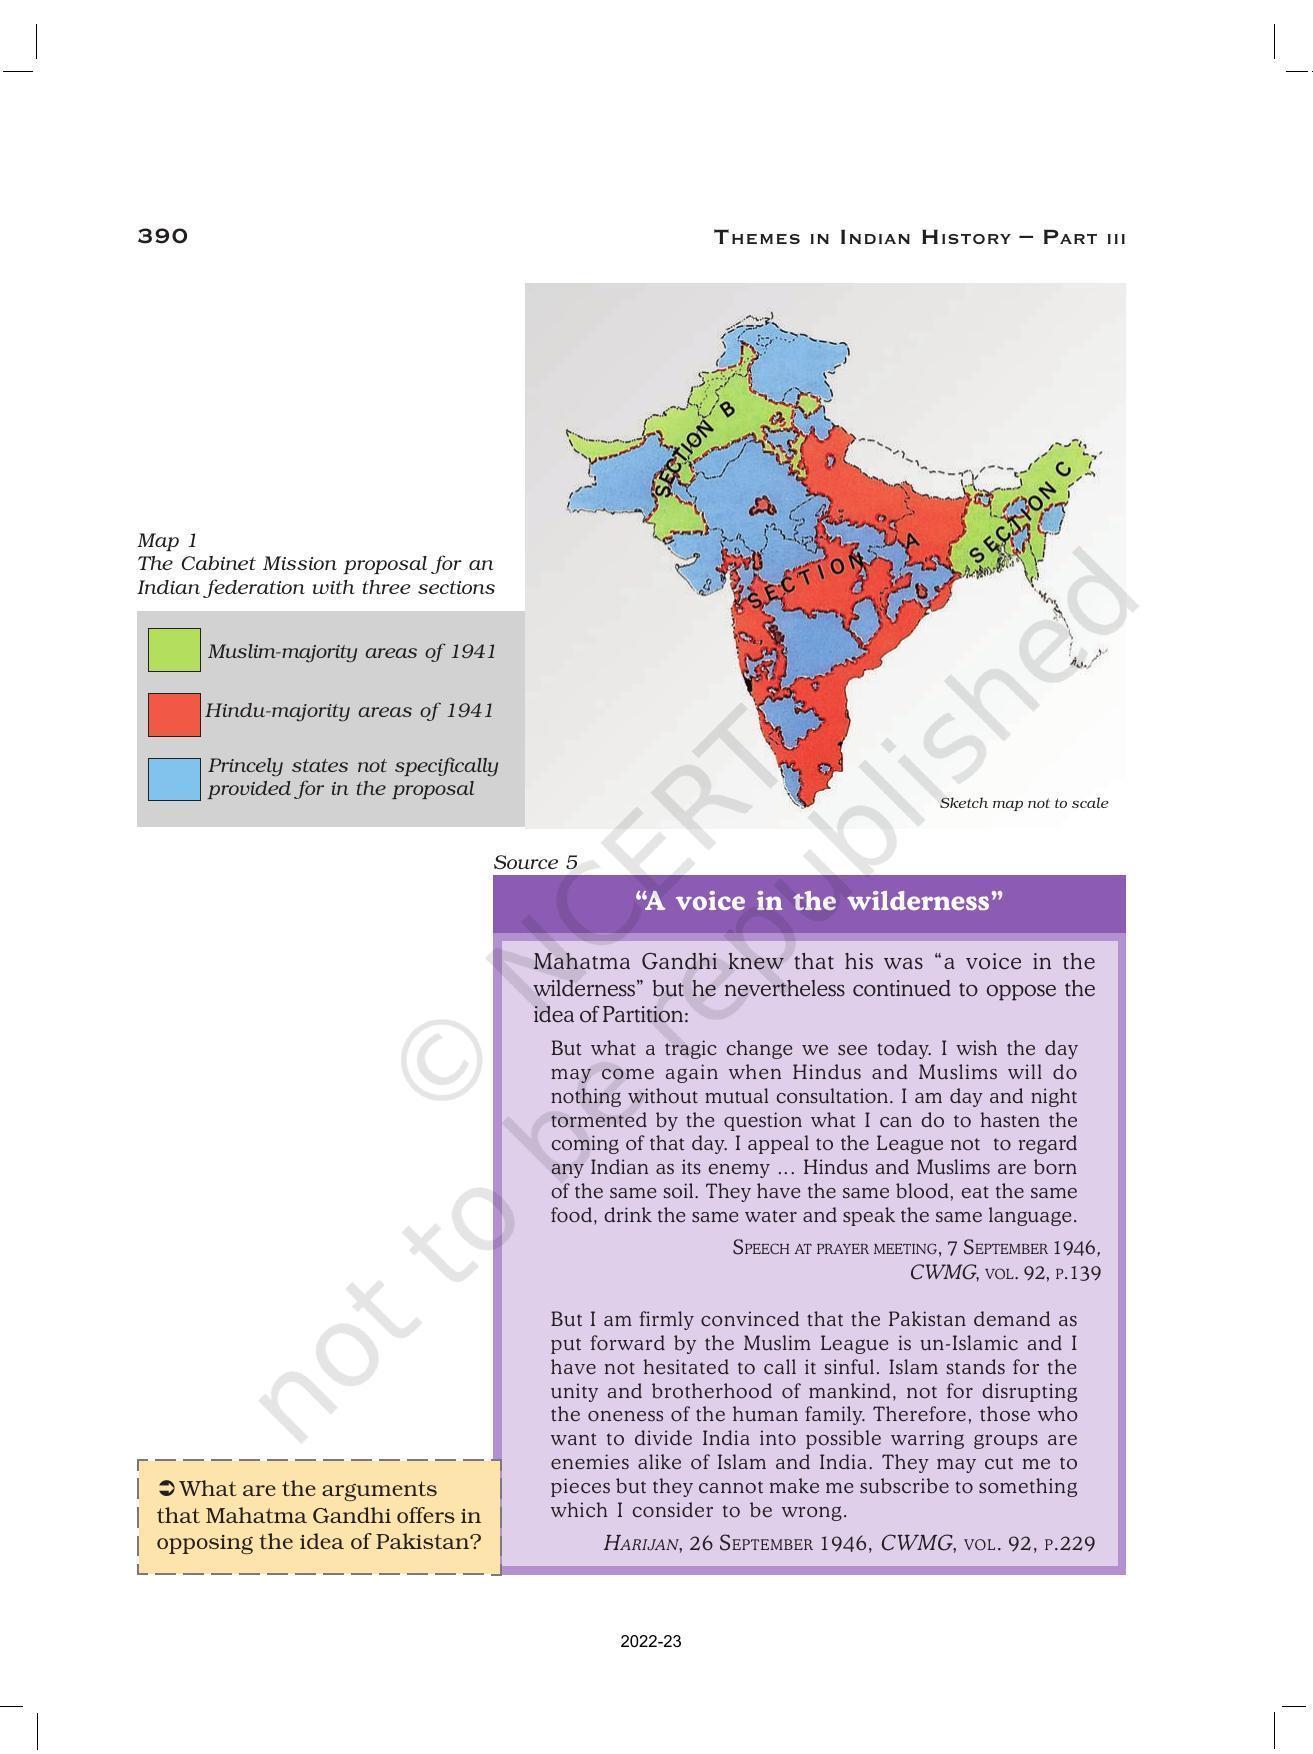 NCERT Book for Class 12 History (Part-III) Chapter 14 Understanding Partition - Page 15